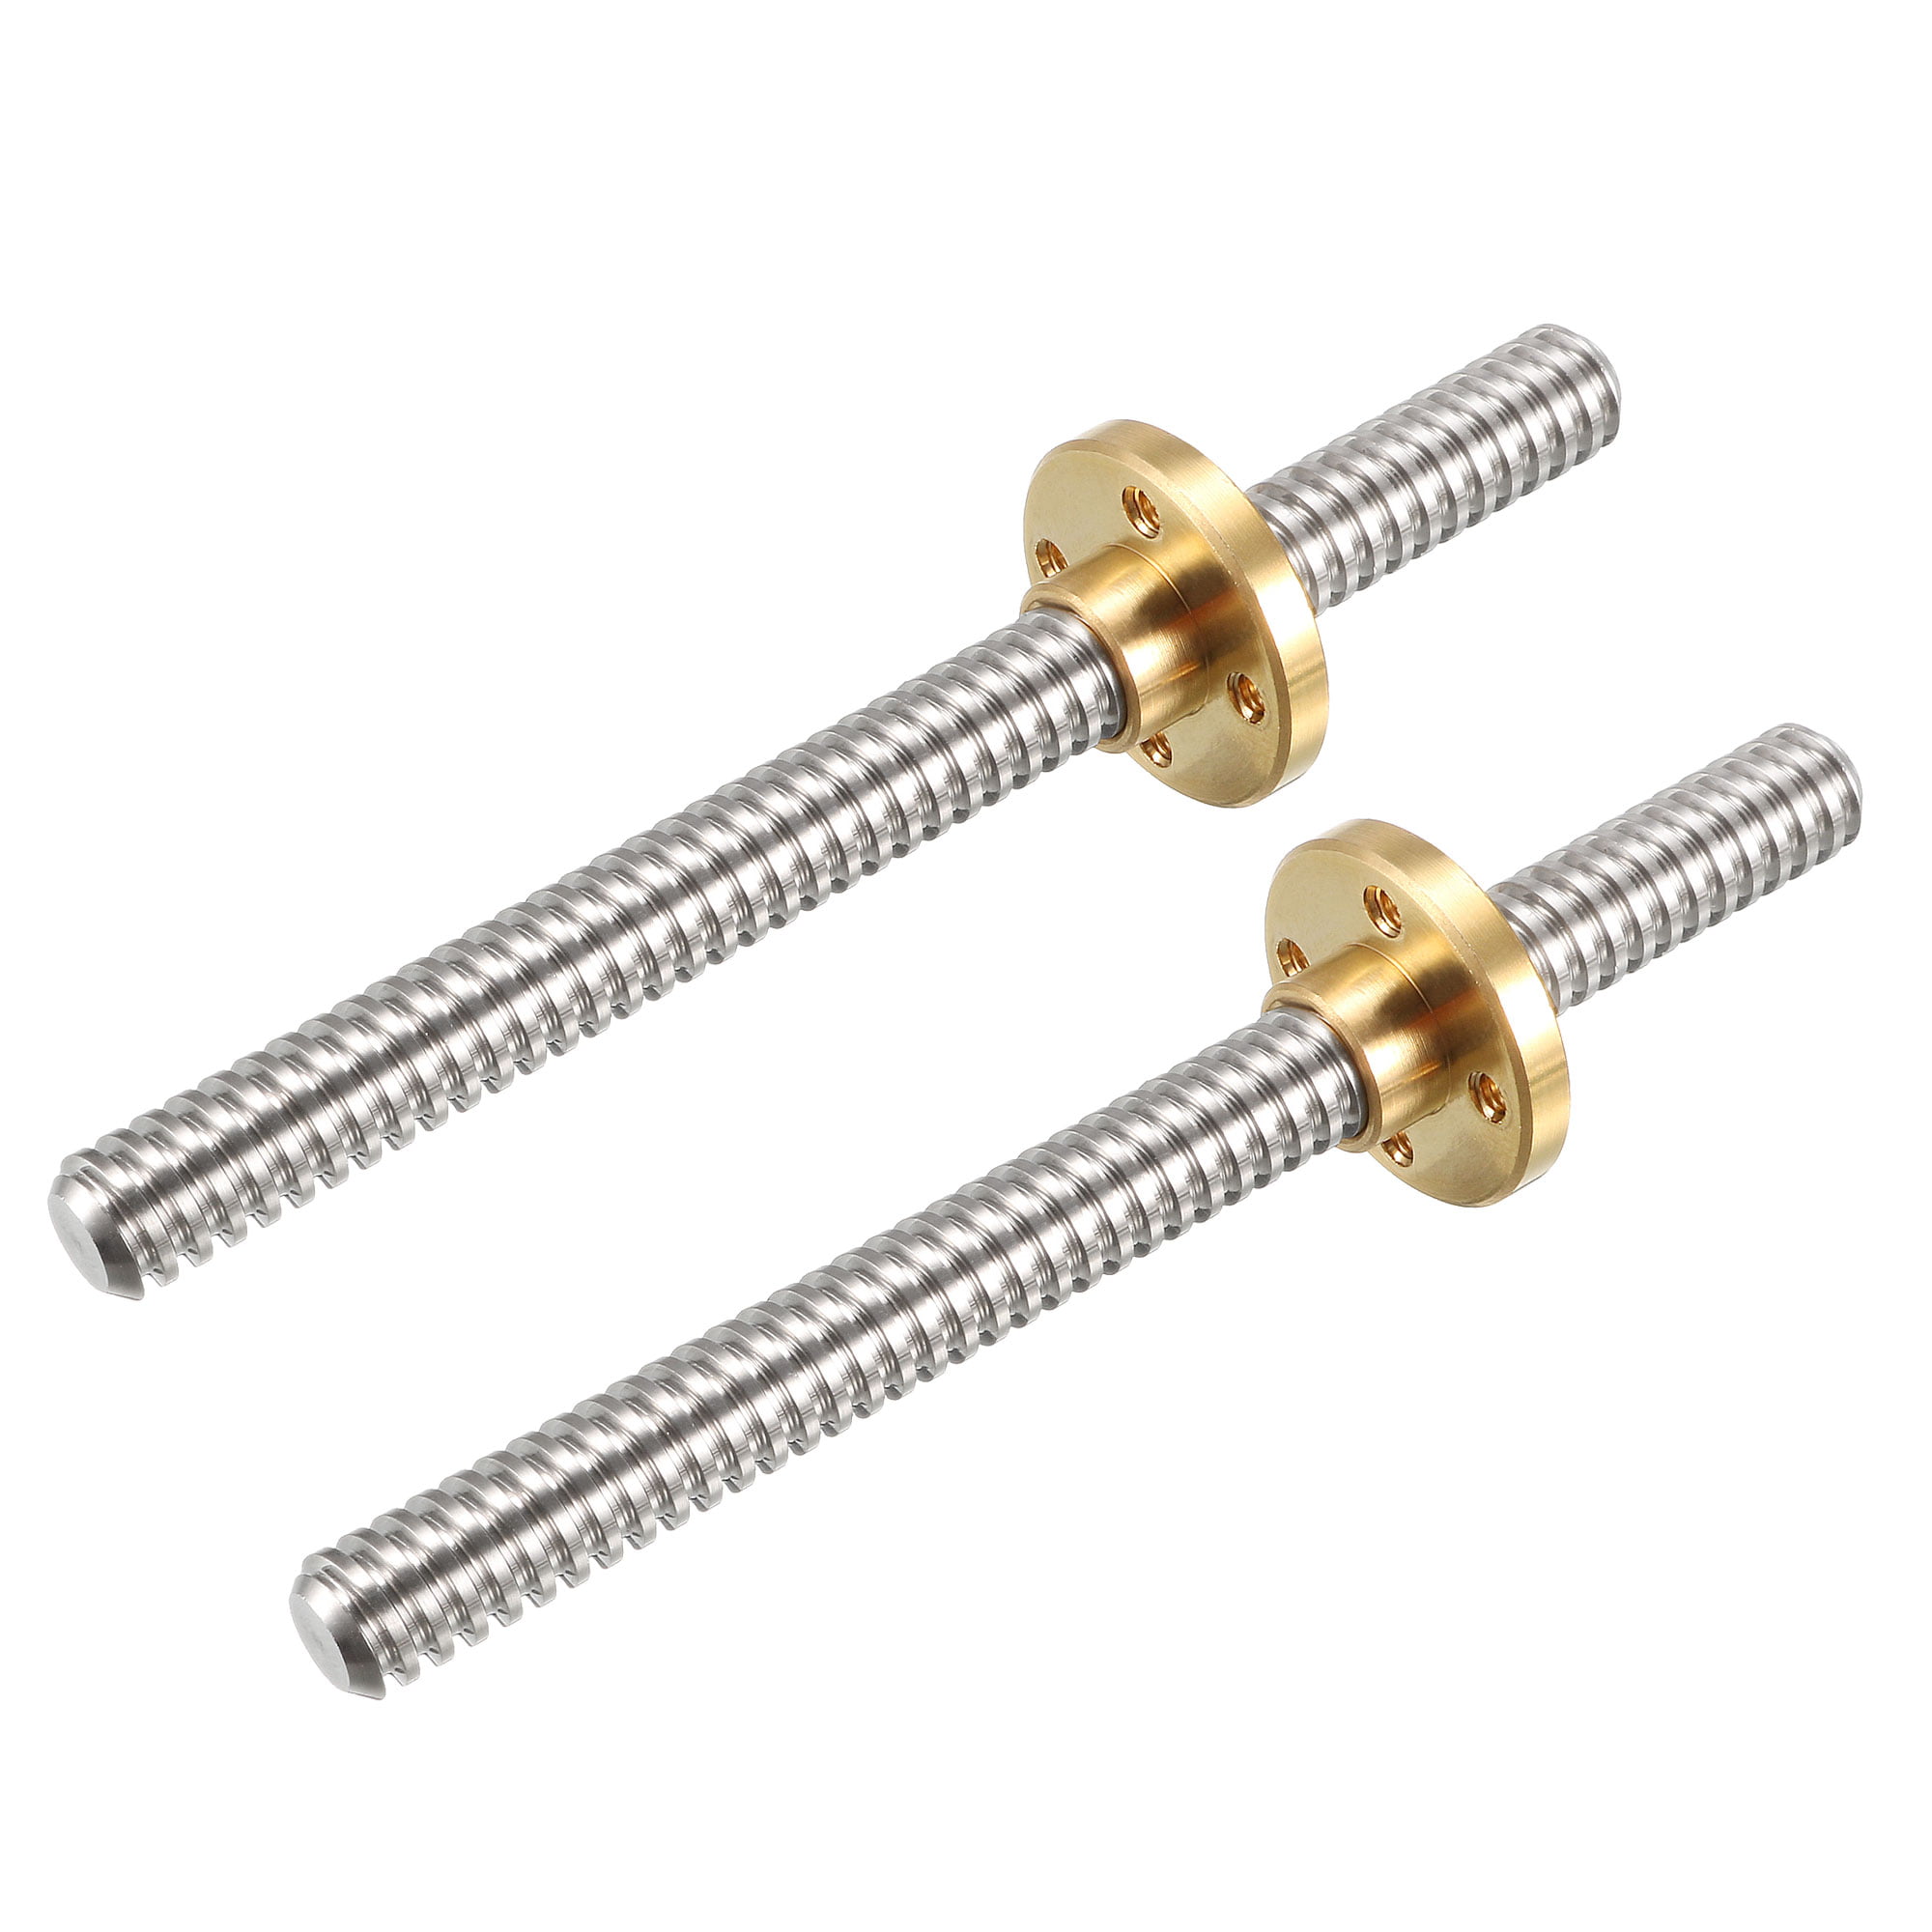 2pcs T8 Thread 2mm Pitch 2mm Lead Trapezoidal Screw Nut Seat for 3D Printer 